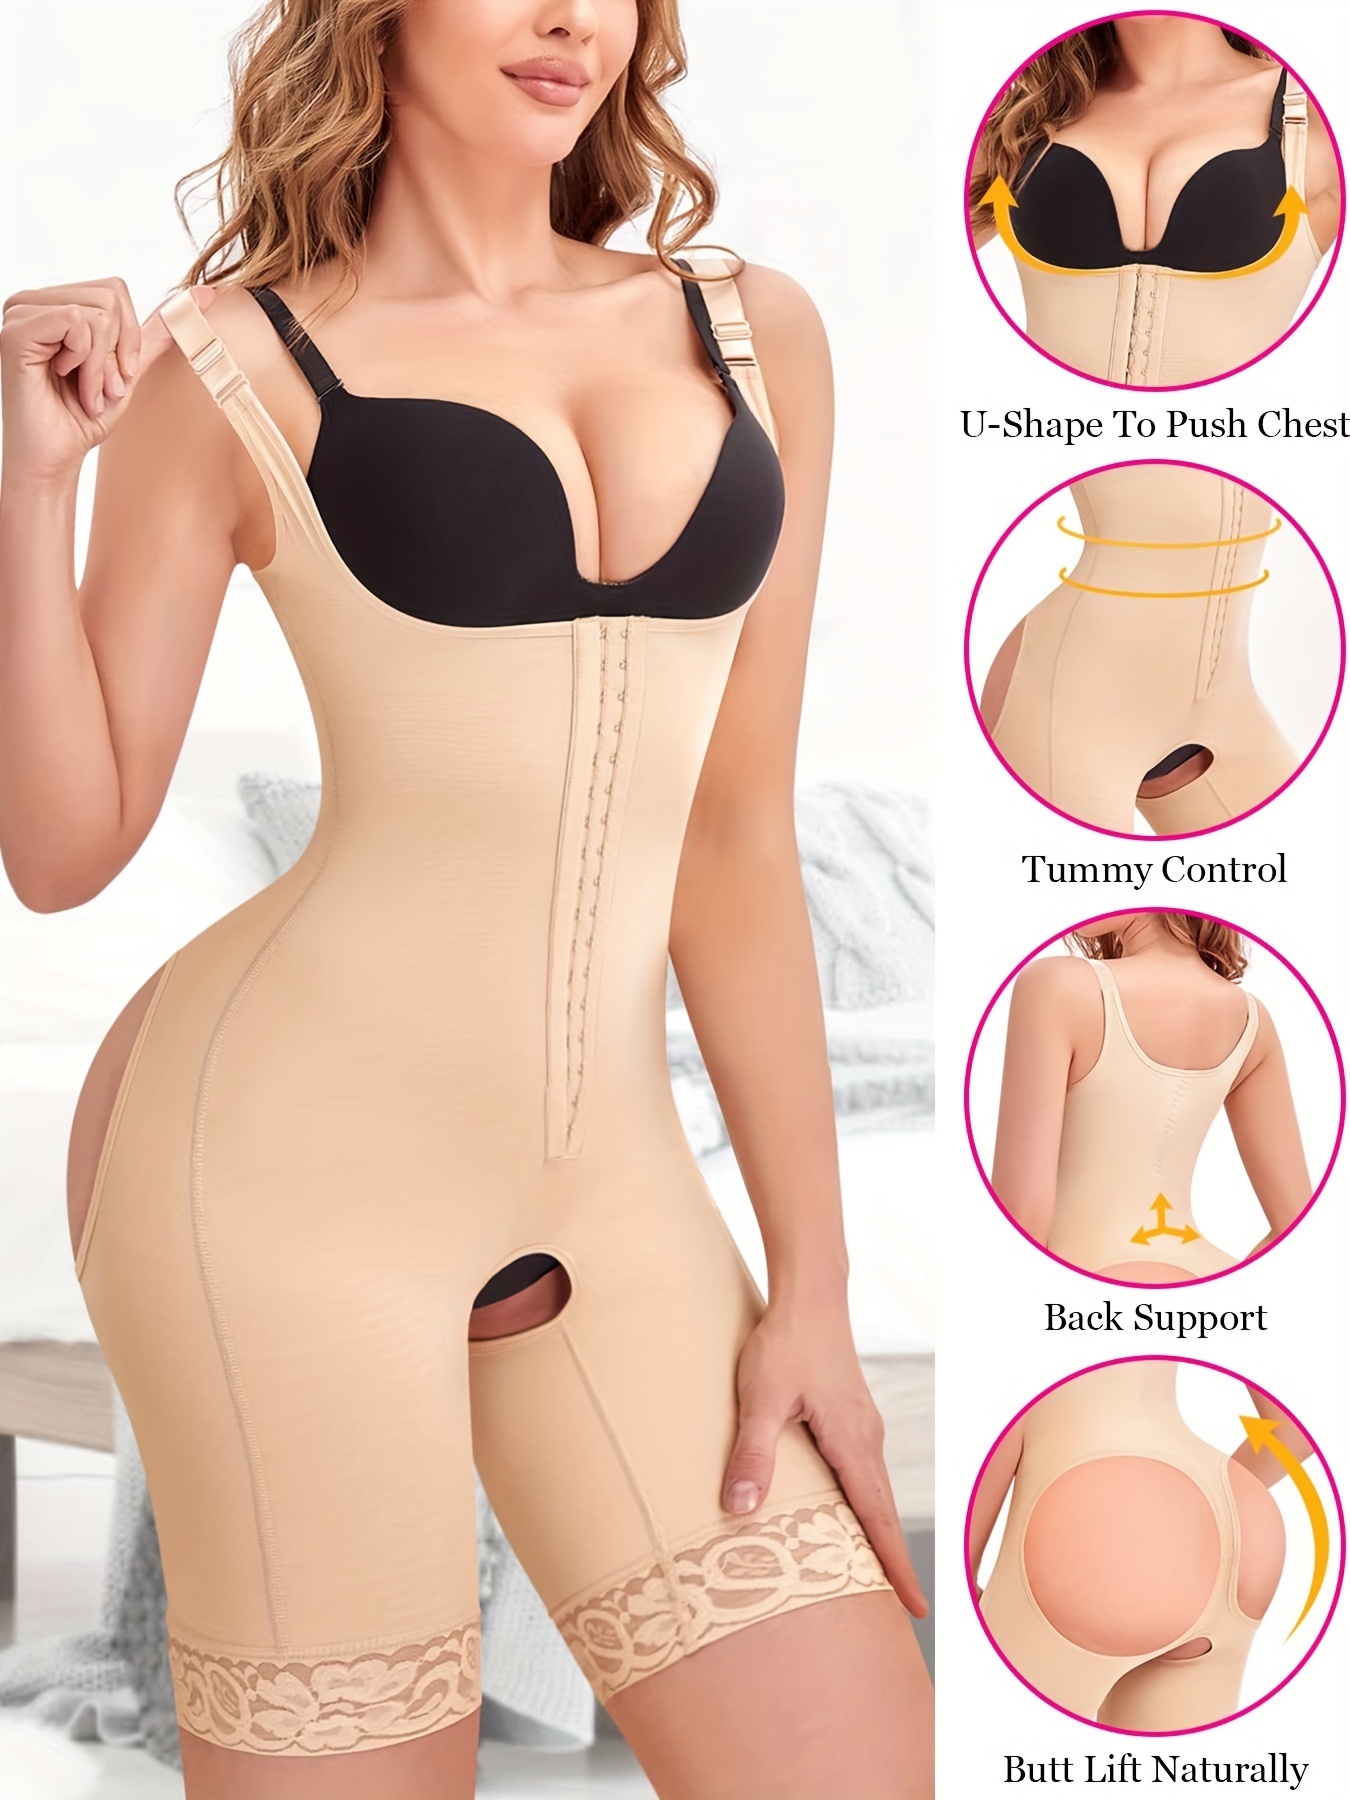 Body Beautiful Womens Full Body Slip Shaper with Lace Trim at Bust